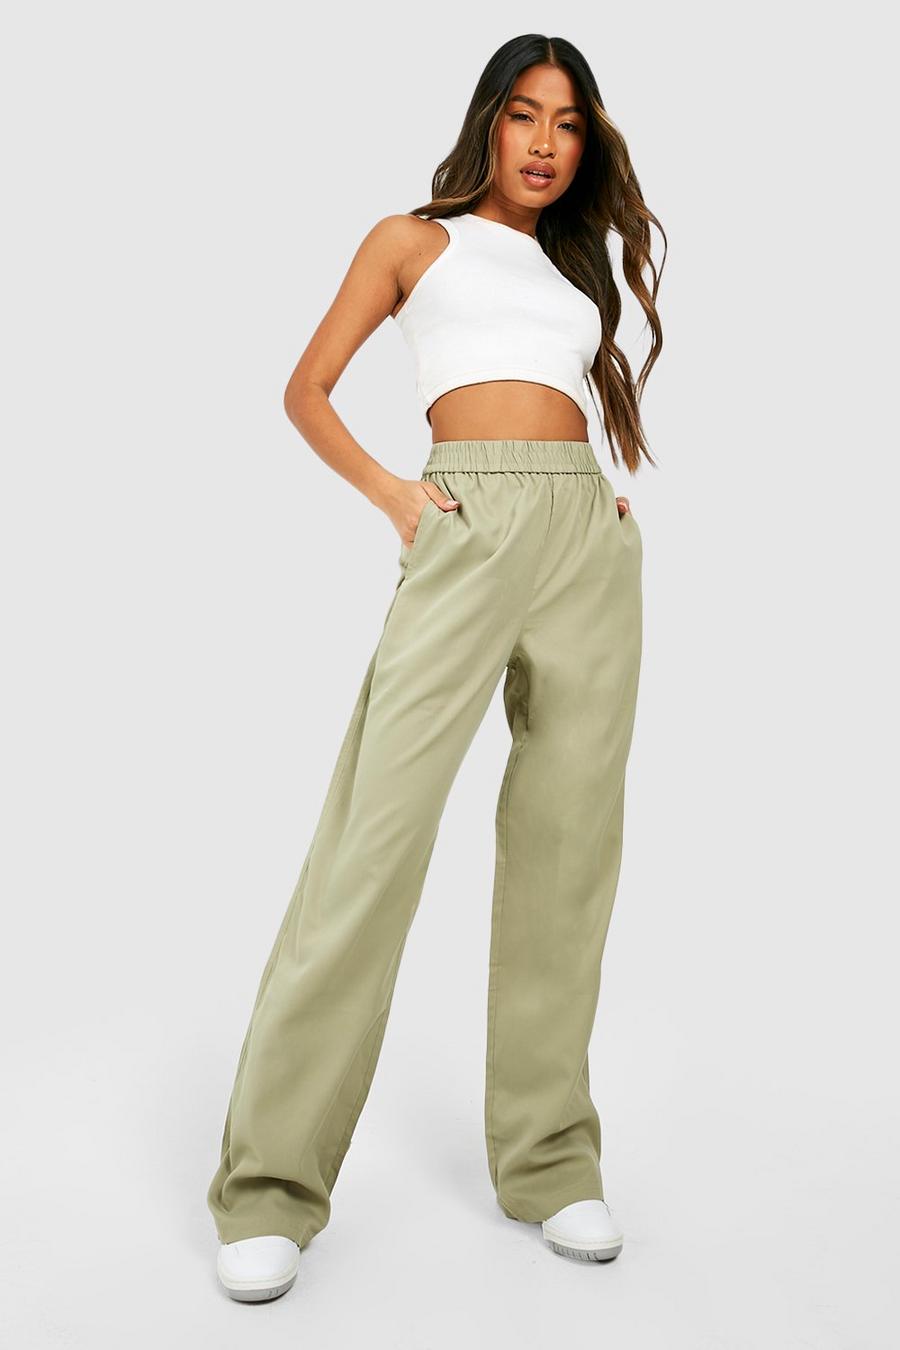 Khaki Elasticated Waist Relaxed Fit Wide Leg Pants image number 1